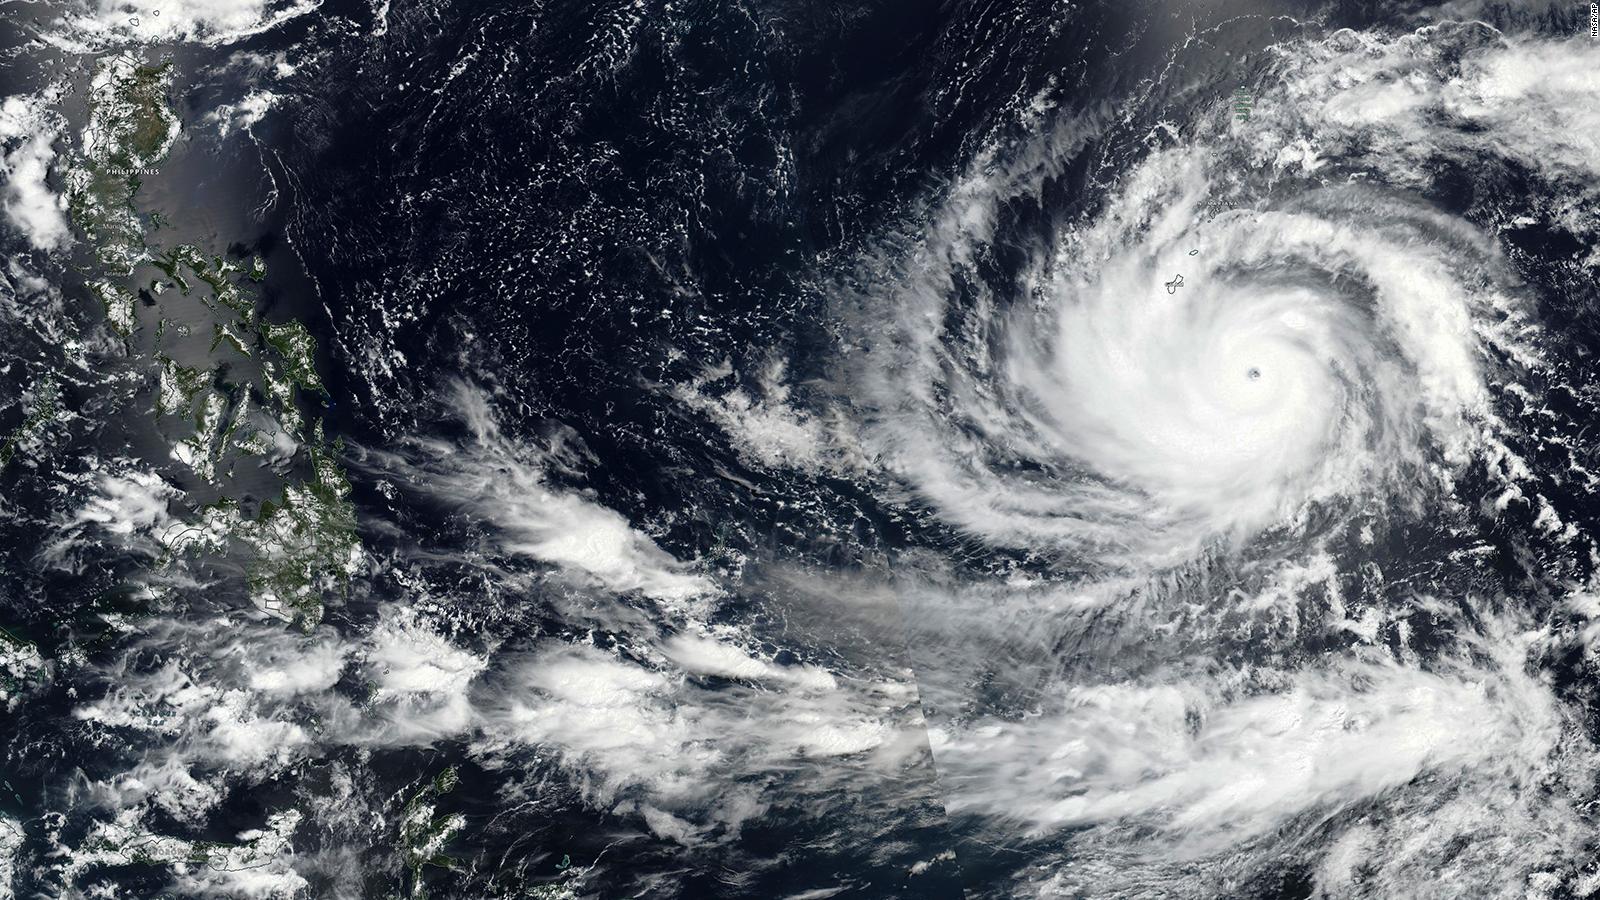 What we know about the aftermath of Super Typhoon Mawar in Guam